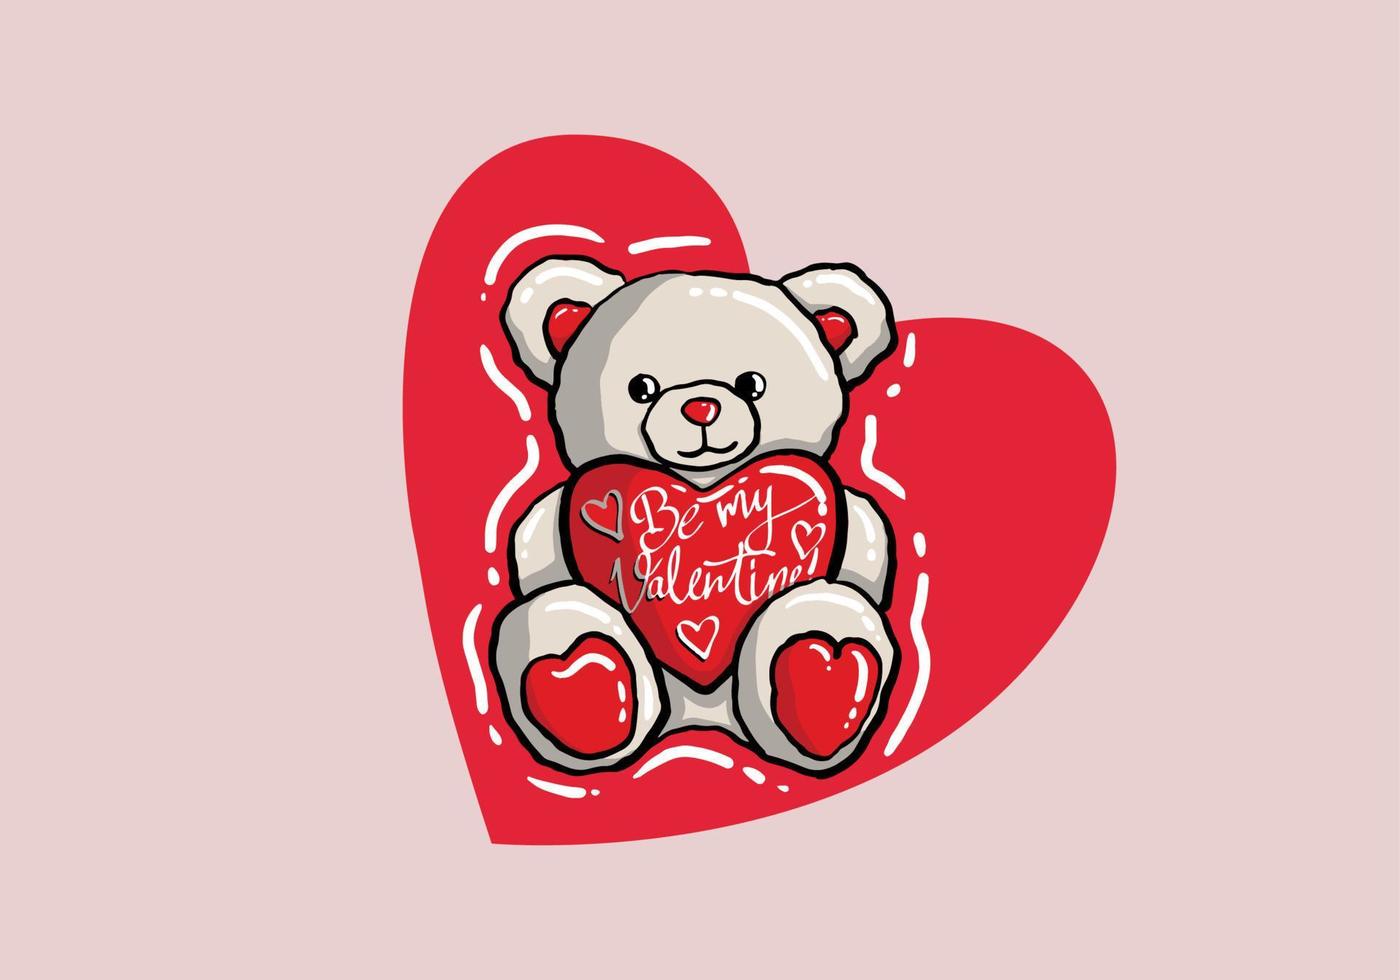 Happy Valentine's Day Vector Design. Valentine's Day Vector With cute Teddy bear and hearts. Valentine's Day Design for Poster, Social Media, Banner or Advertisement.